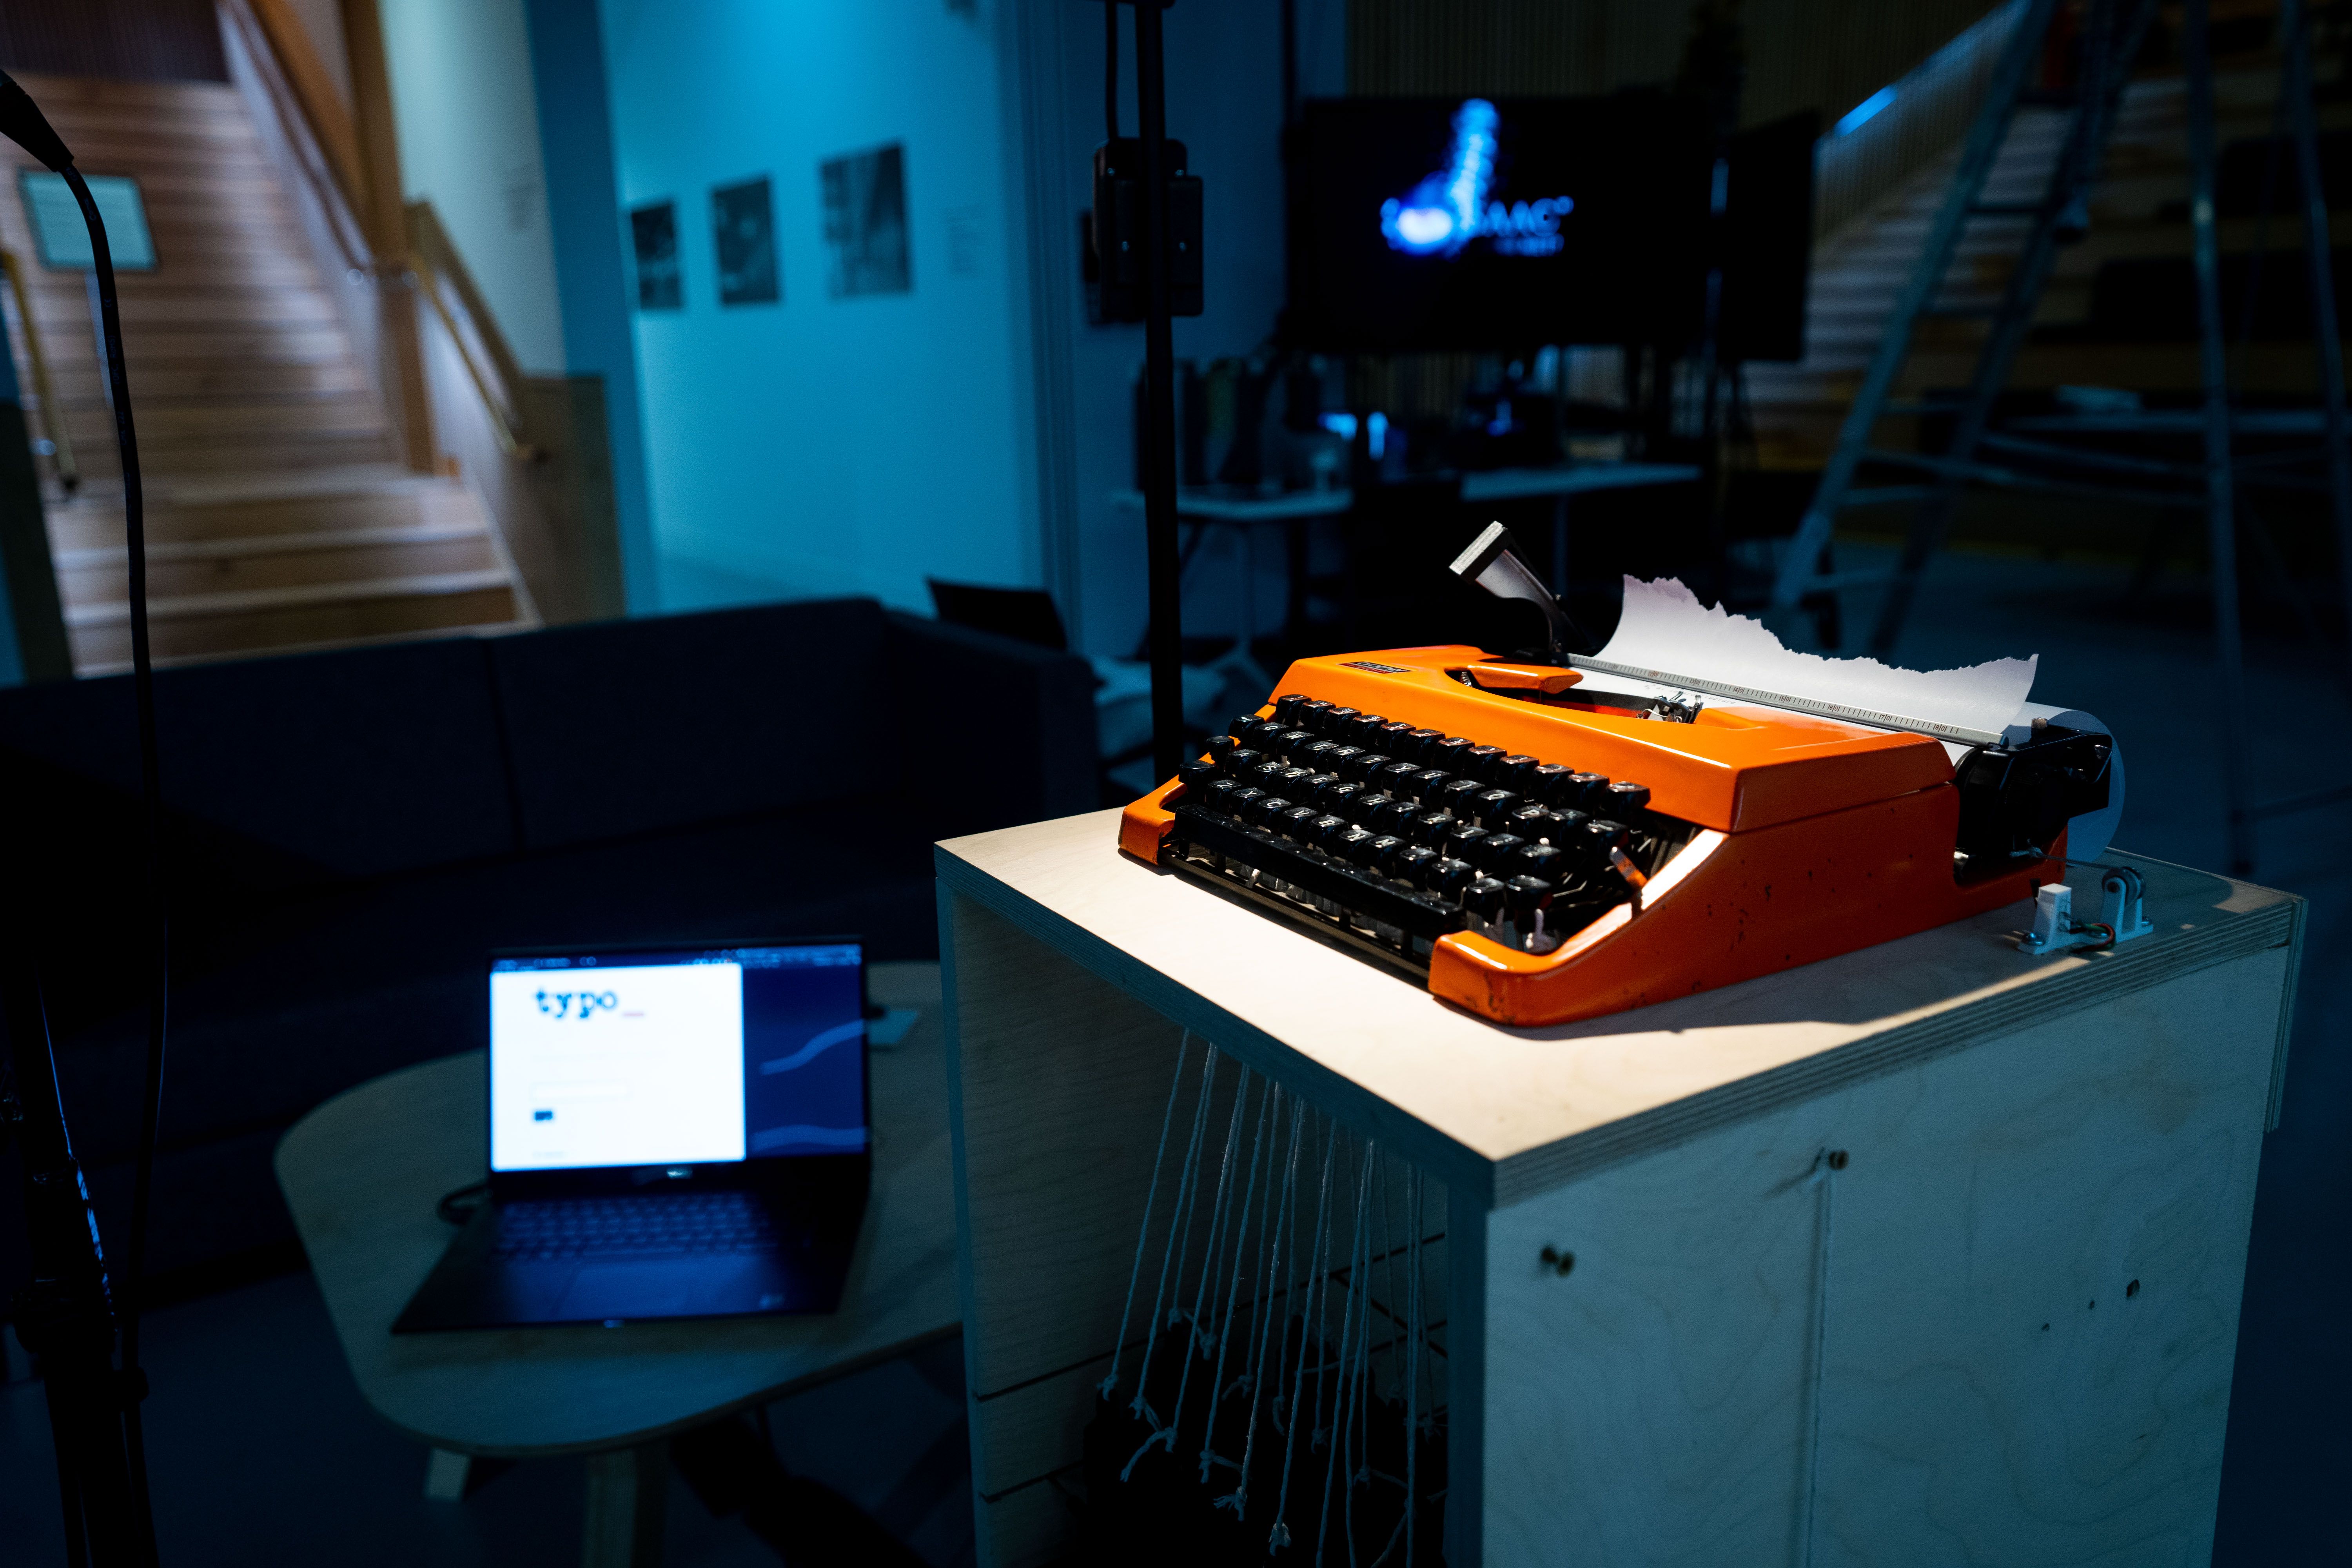 orange typewriter in the forgeround with a laptop running software titled "typo"in the background